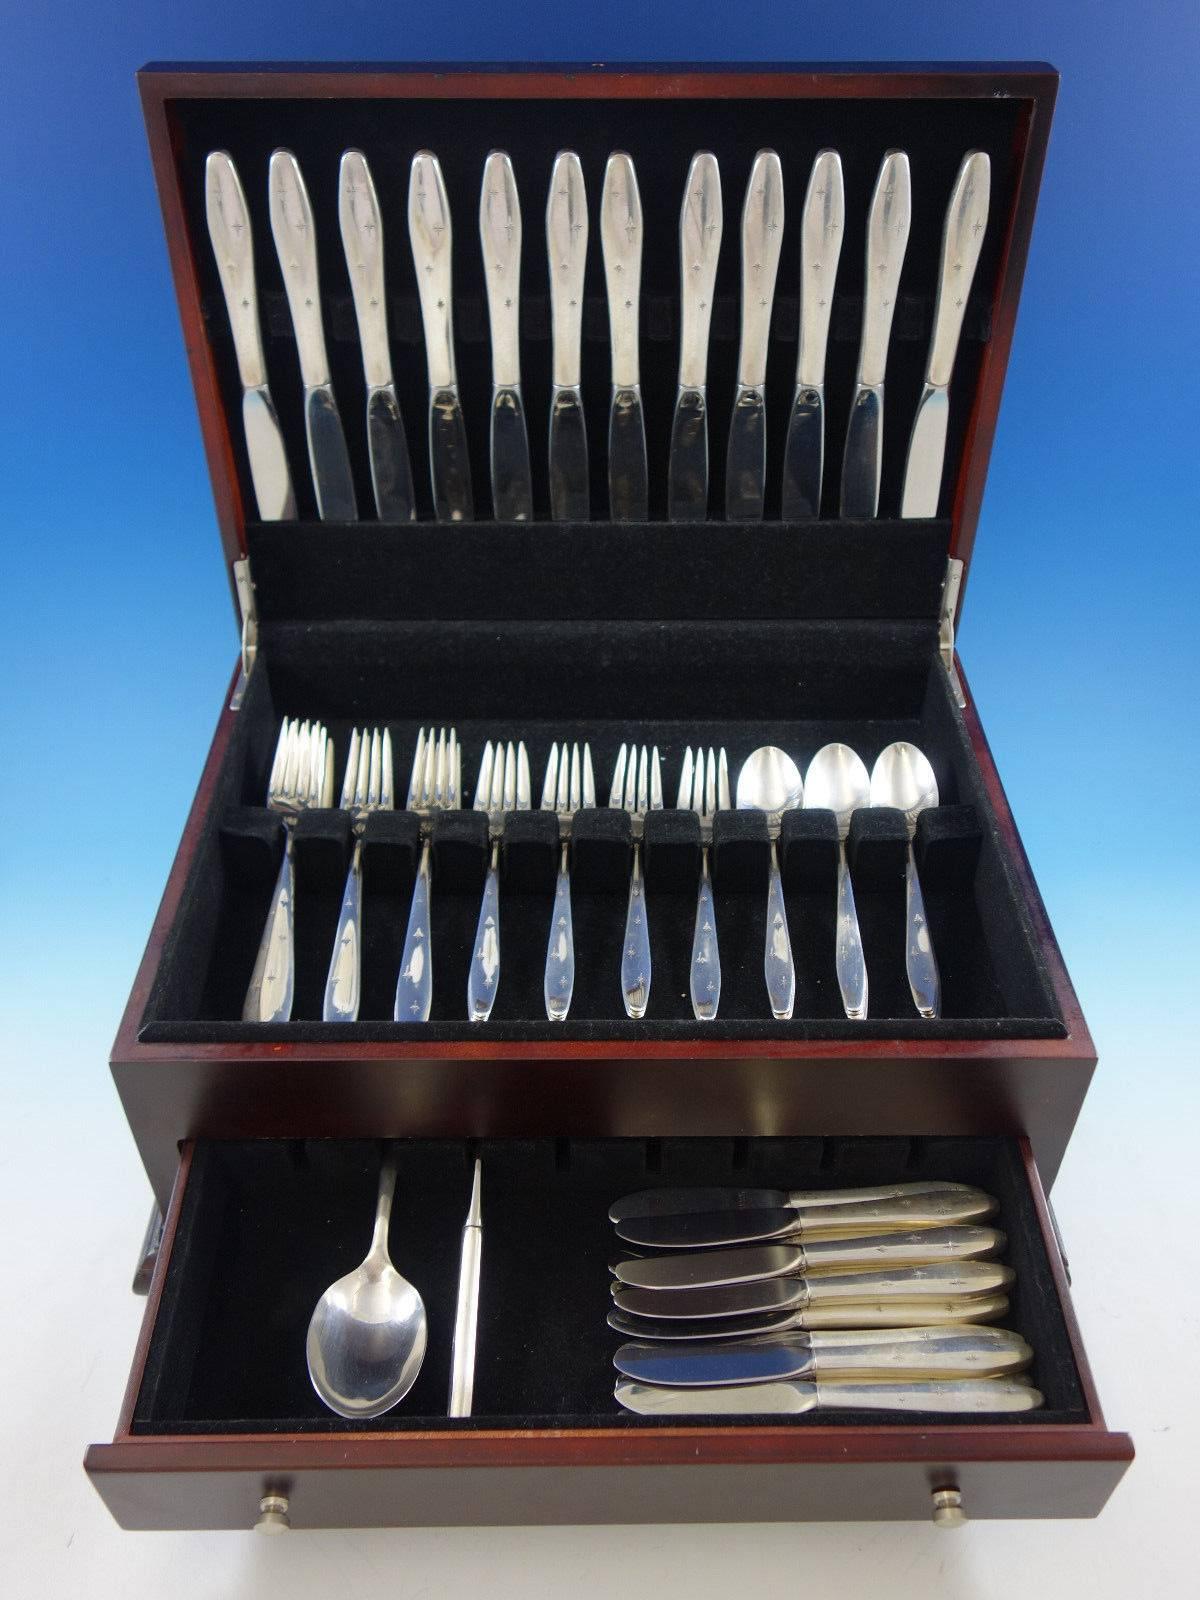 Dawn star by Wallace sterling silver flatware set, 62 pieces. This set includes: 

12 knives, 9